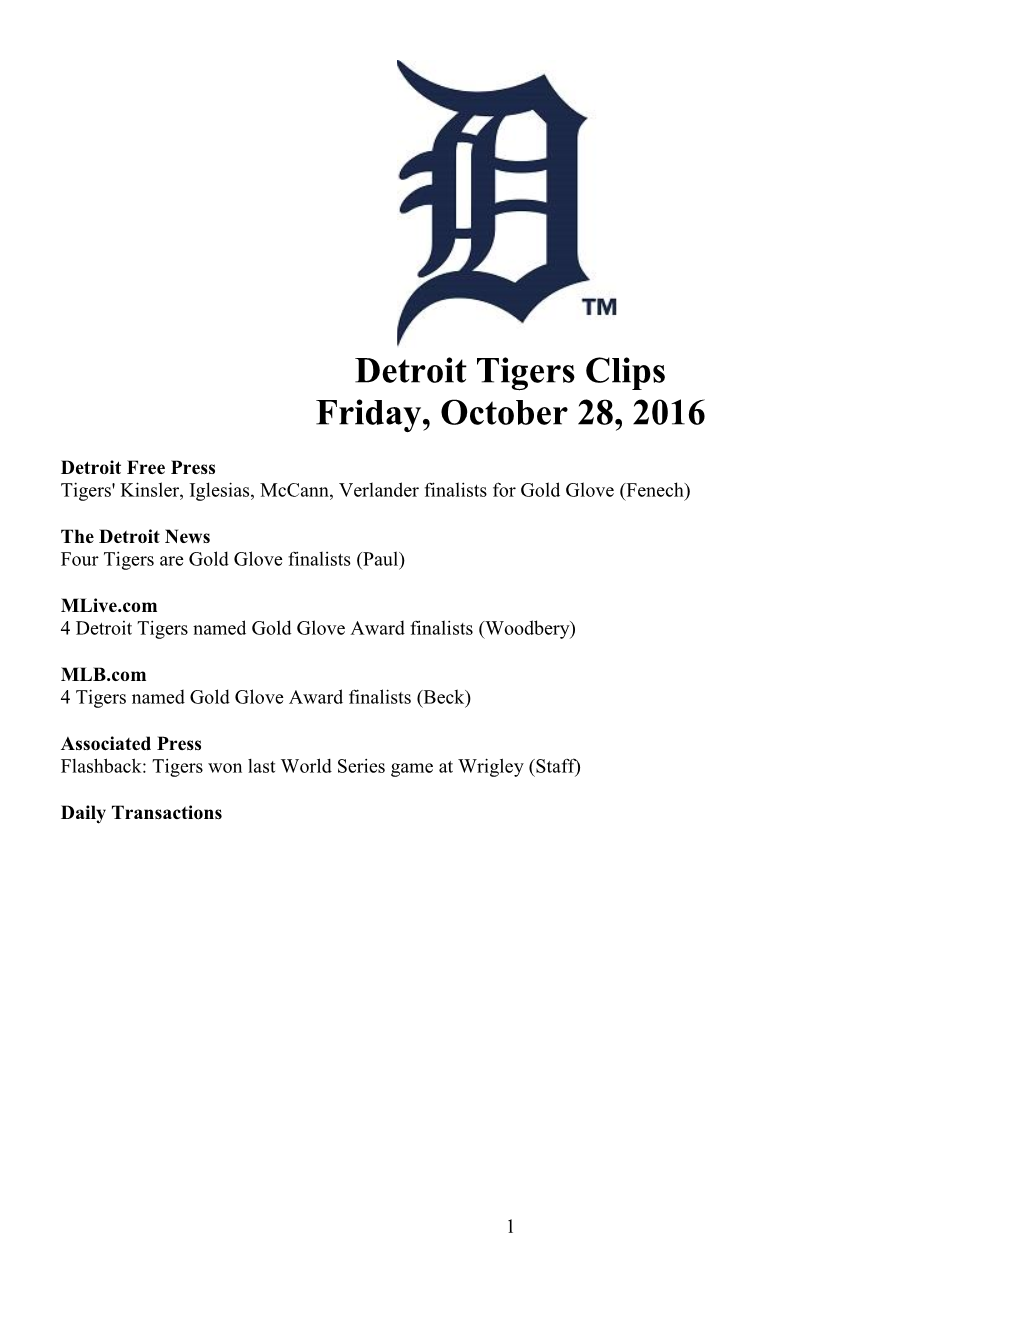 Detroit Tigers Clips Friday, October 28, 2016